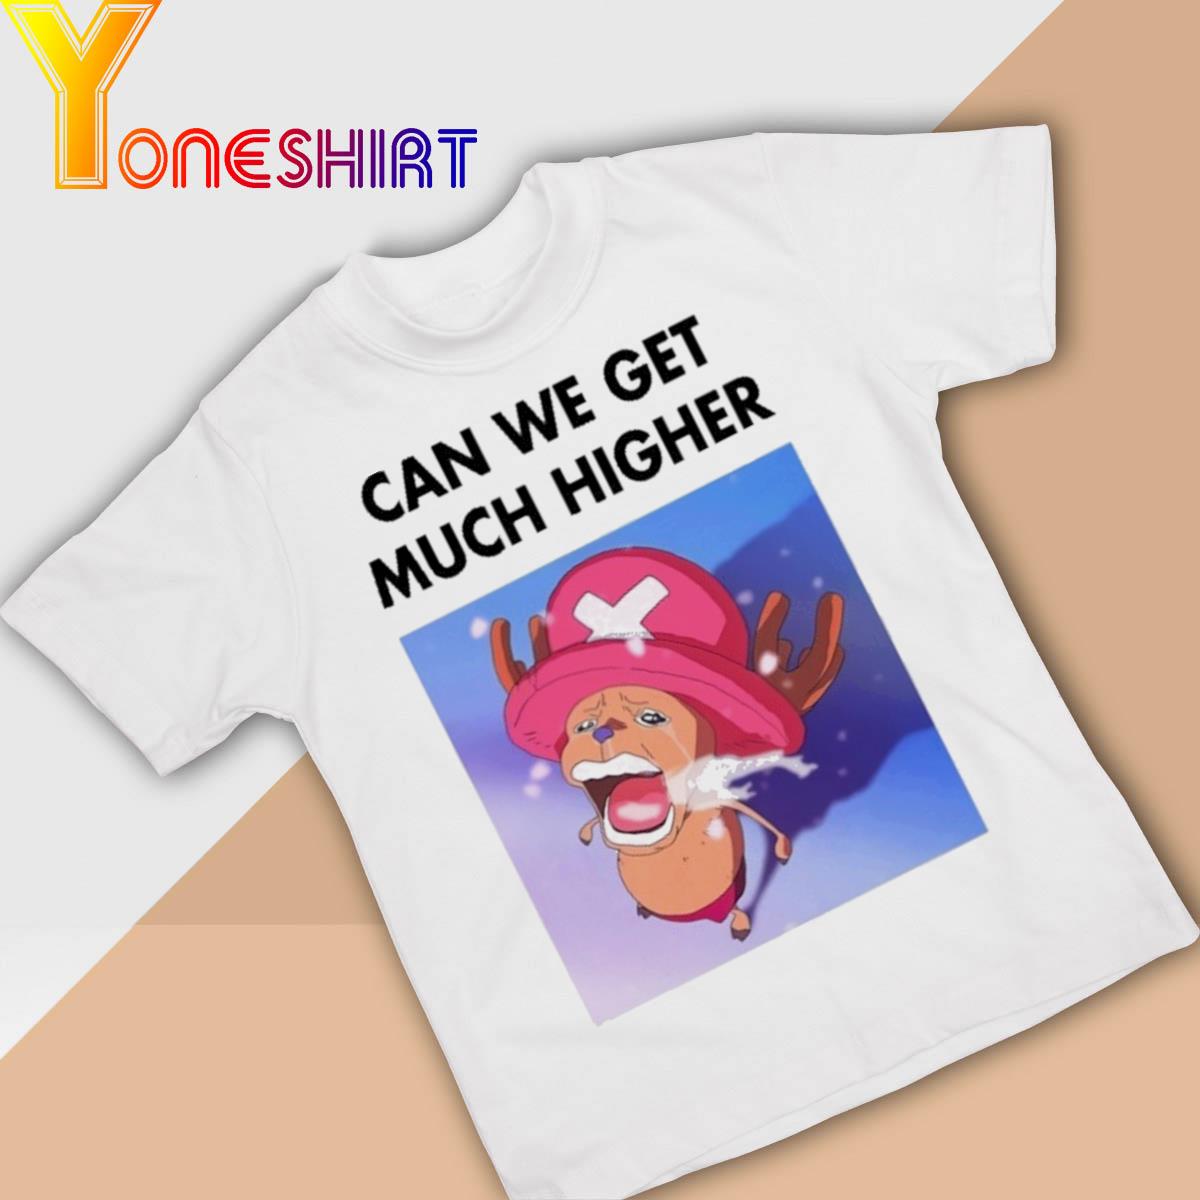 Can We Get Much Higher shirt